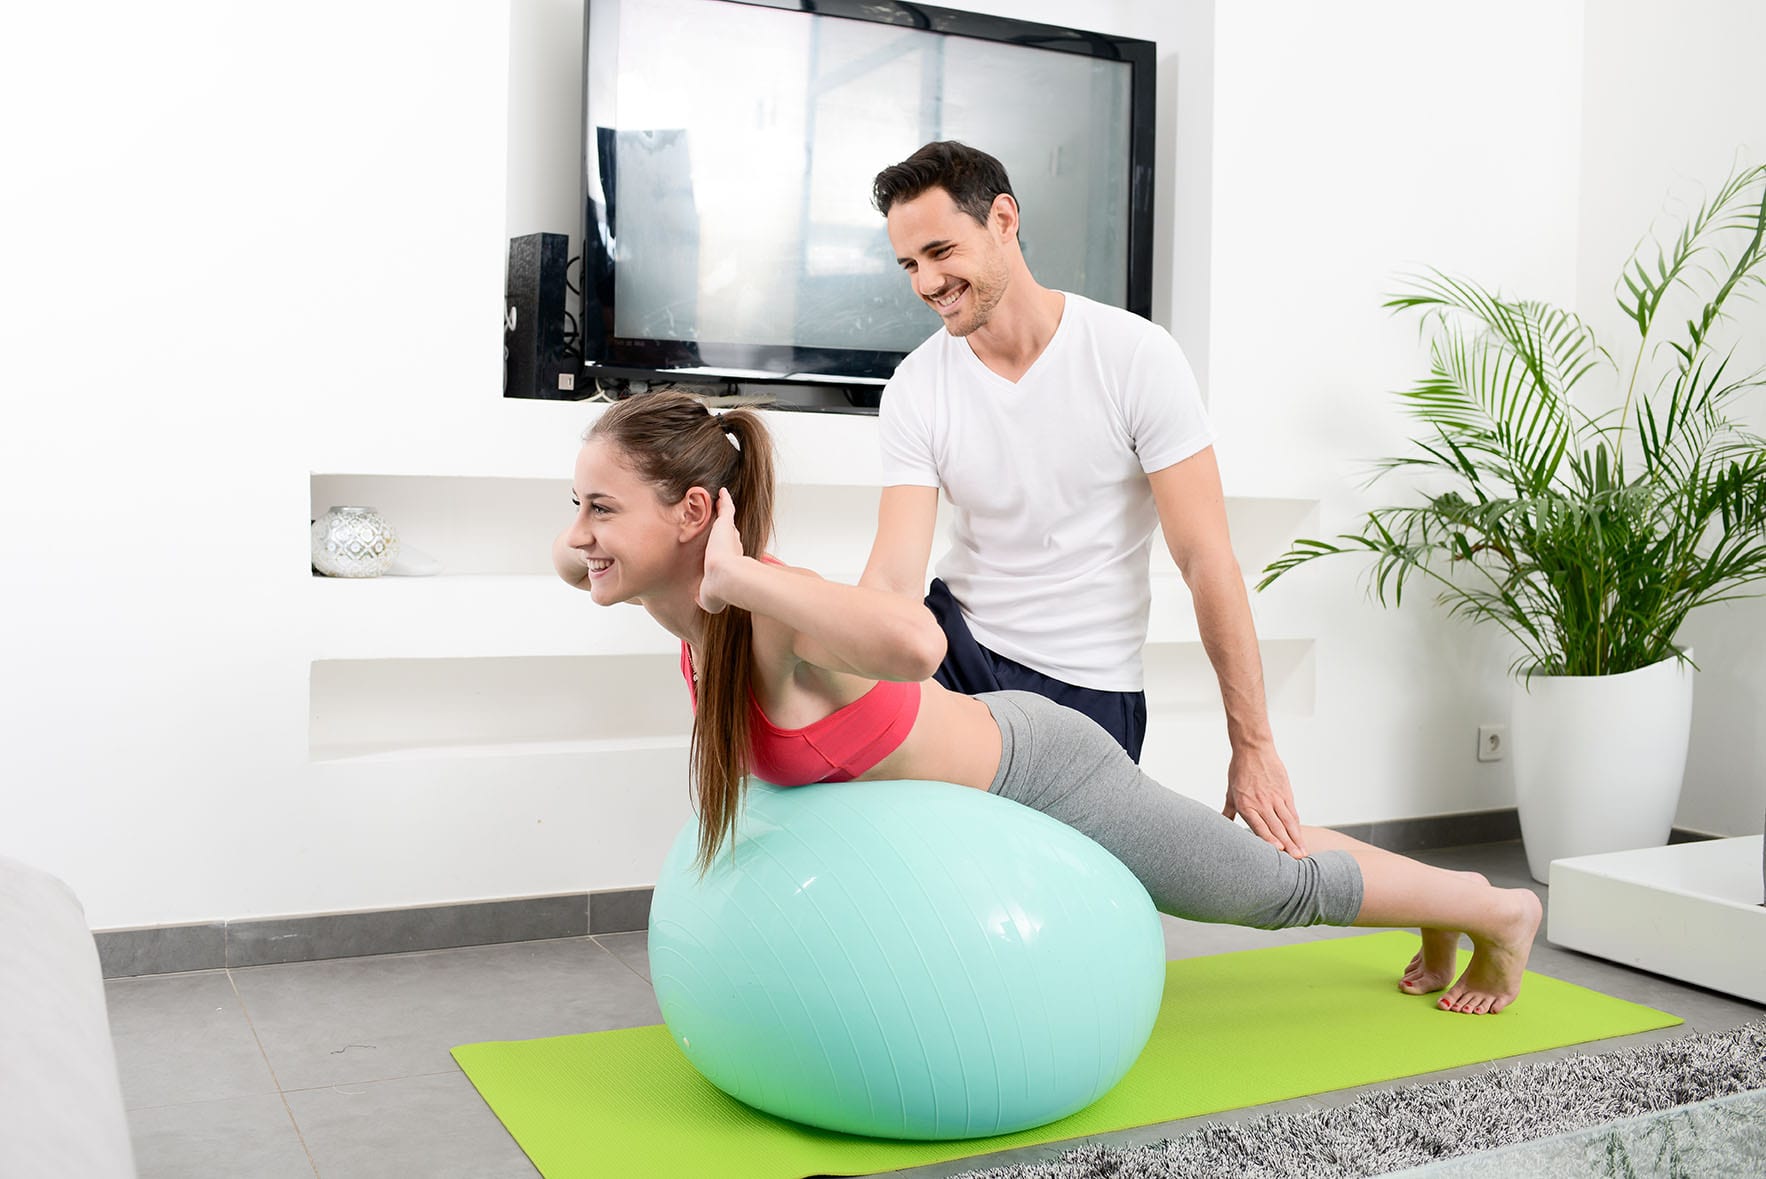 https://sheppardmethodpilates.com/wp-content/uploads/2017/03/Male-private-pilates-instructor-working-with-female-in-home.jpg